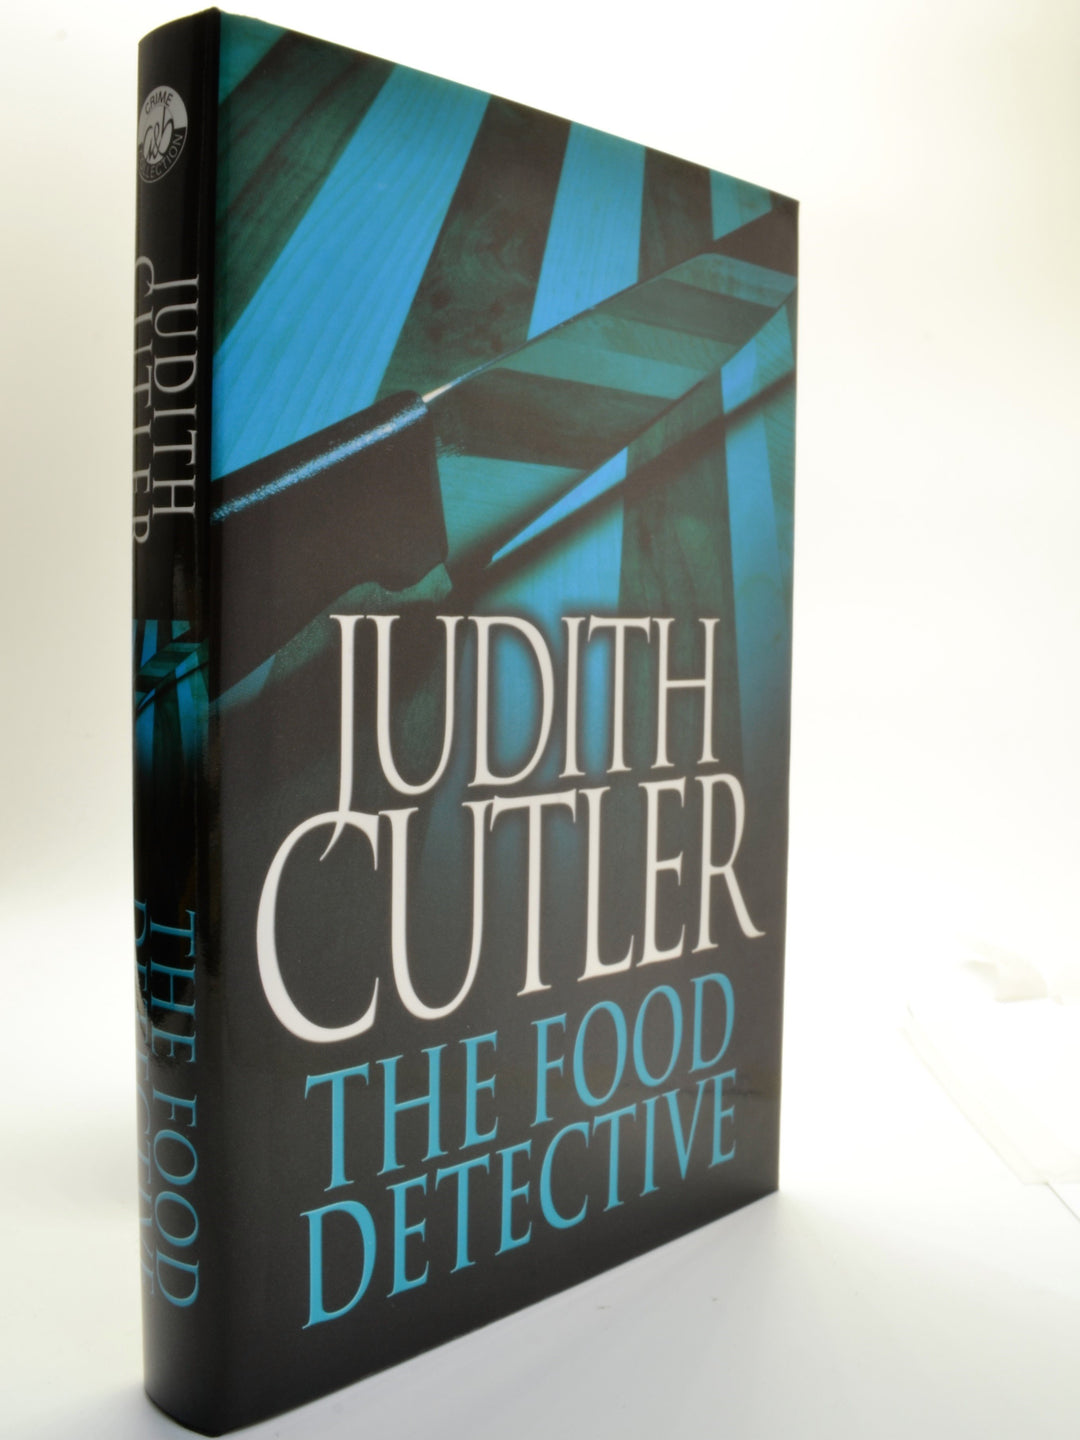 Cutler, Judith - The Food Detective - SIGNED | back cover